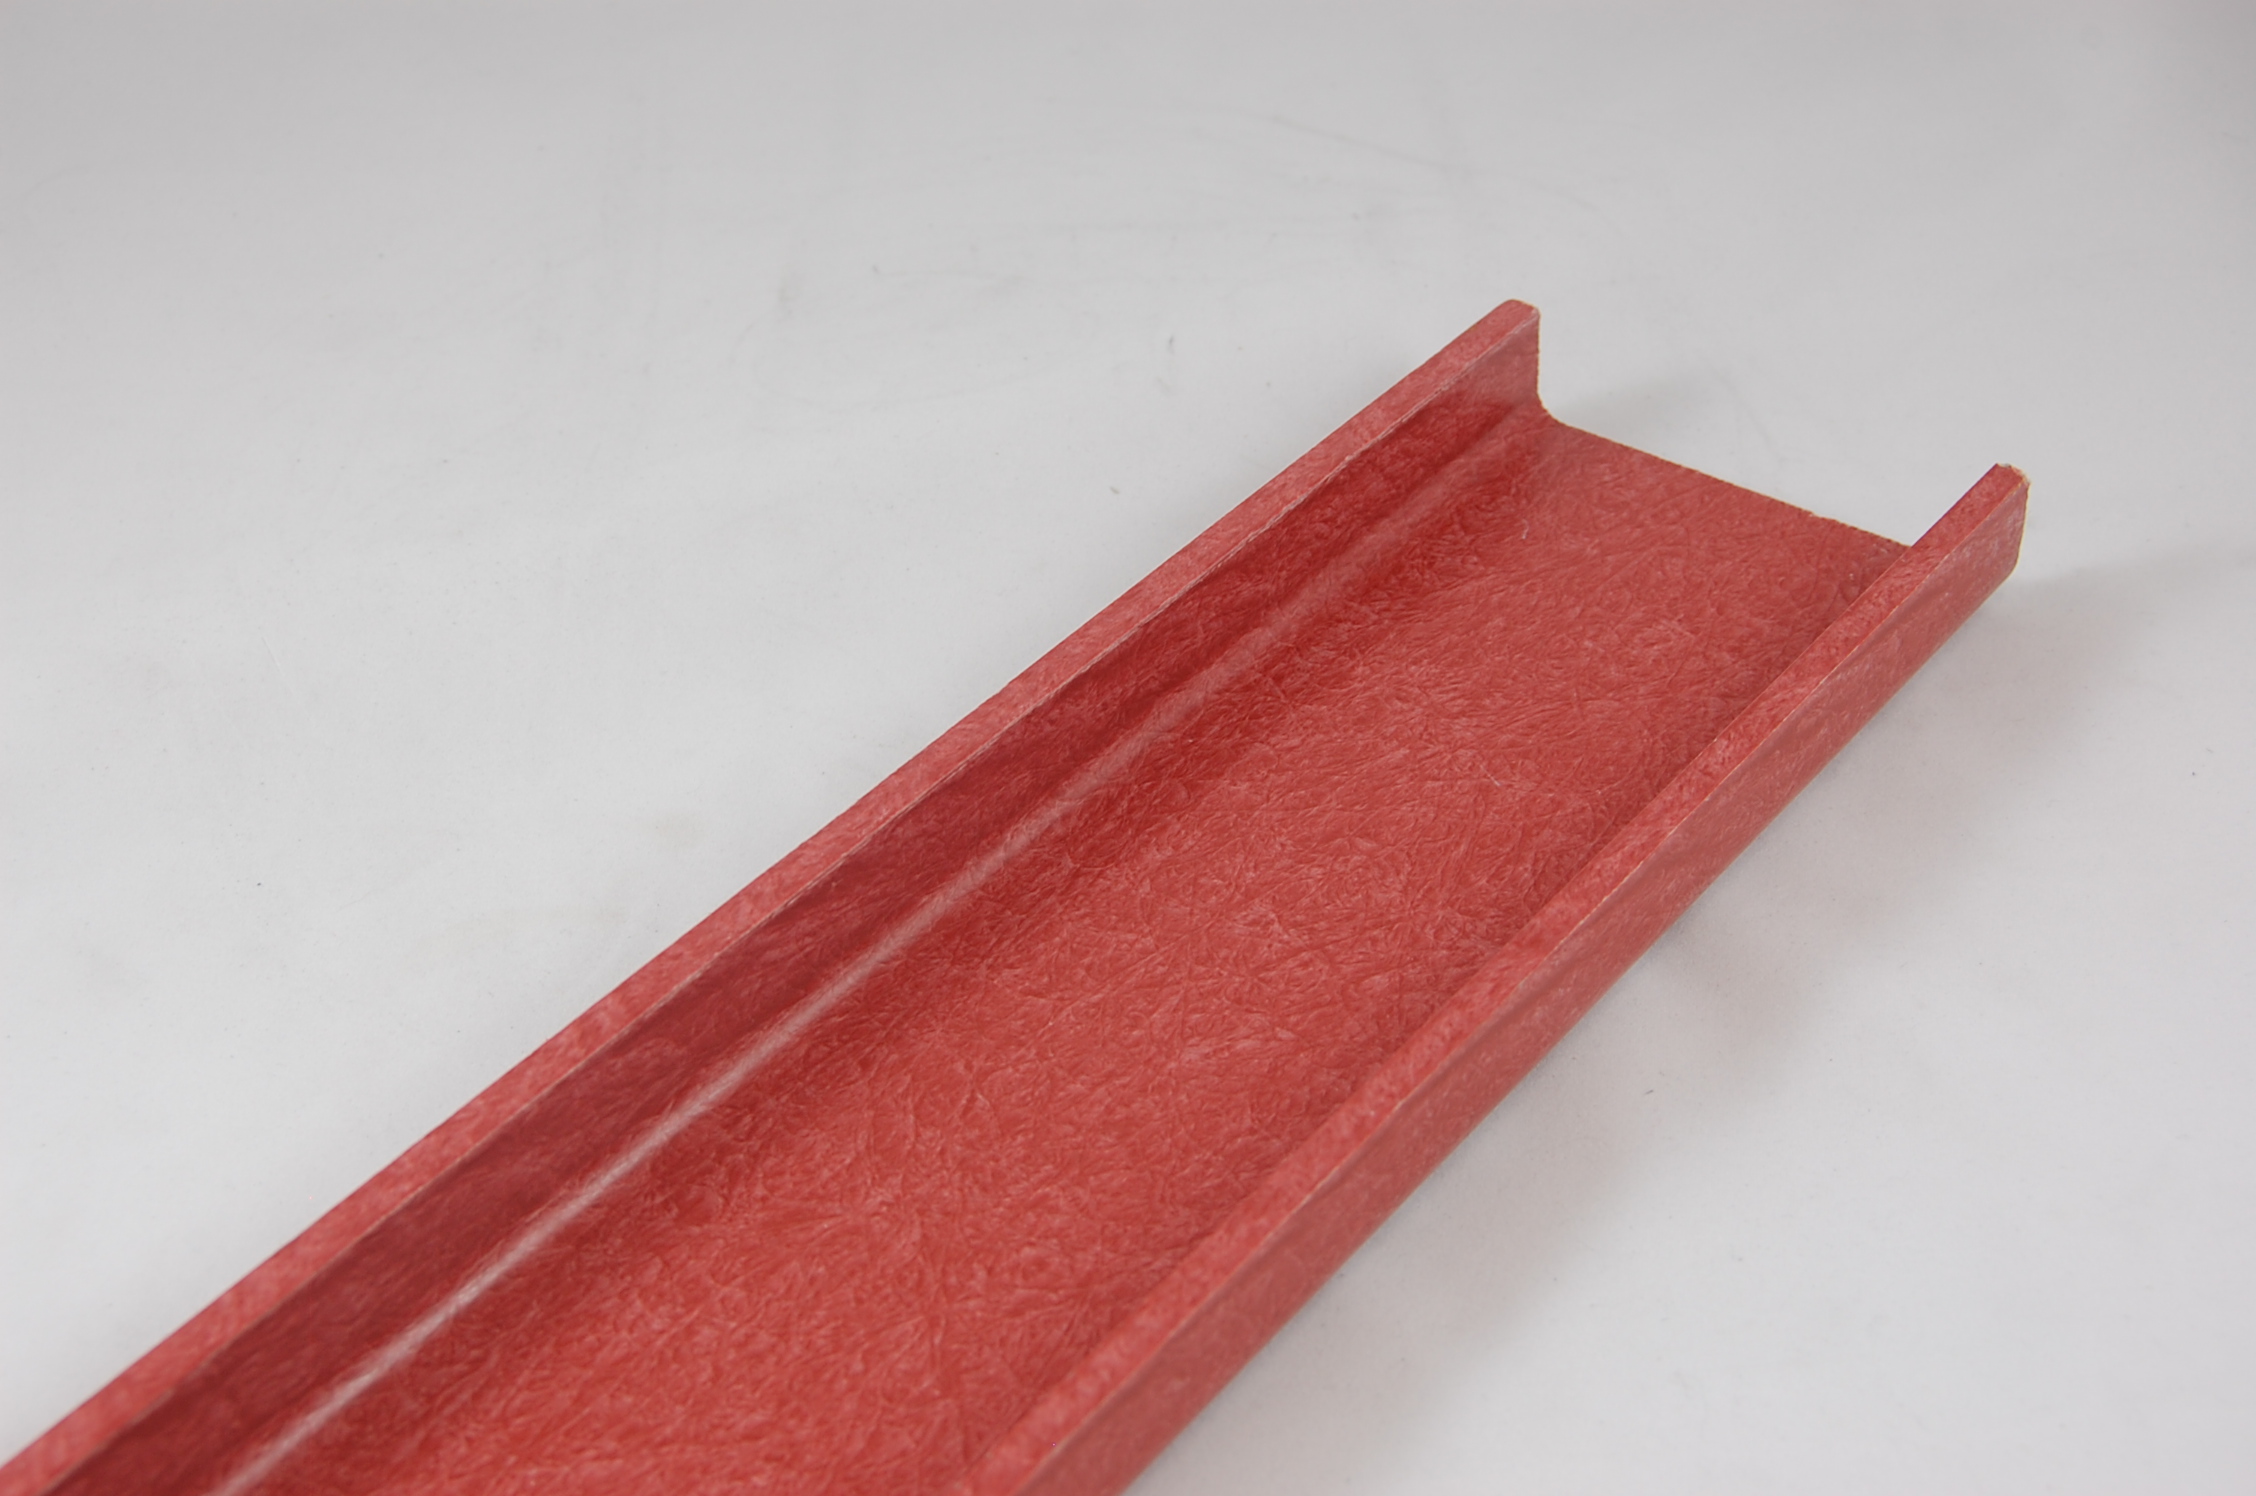 11-1/2"W x 1-7/16" Leg x 5/32" thick GLASROD® Grade 1130 Fiberglass-Reinforced Polyester Laminate Channel, red,  120"L channel